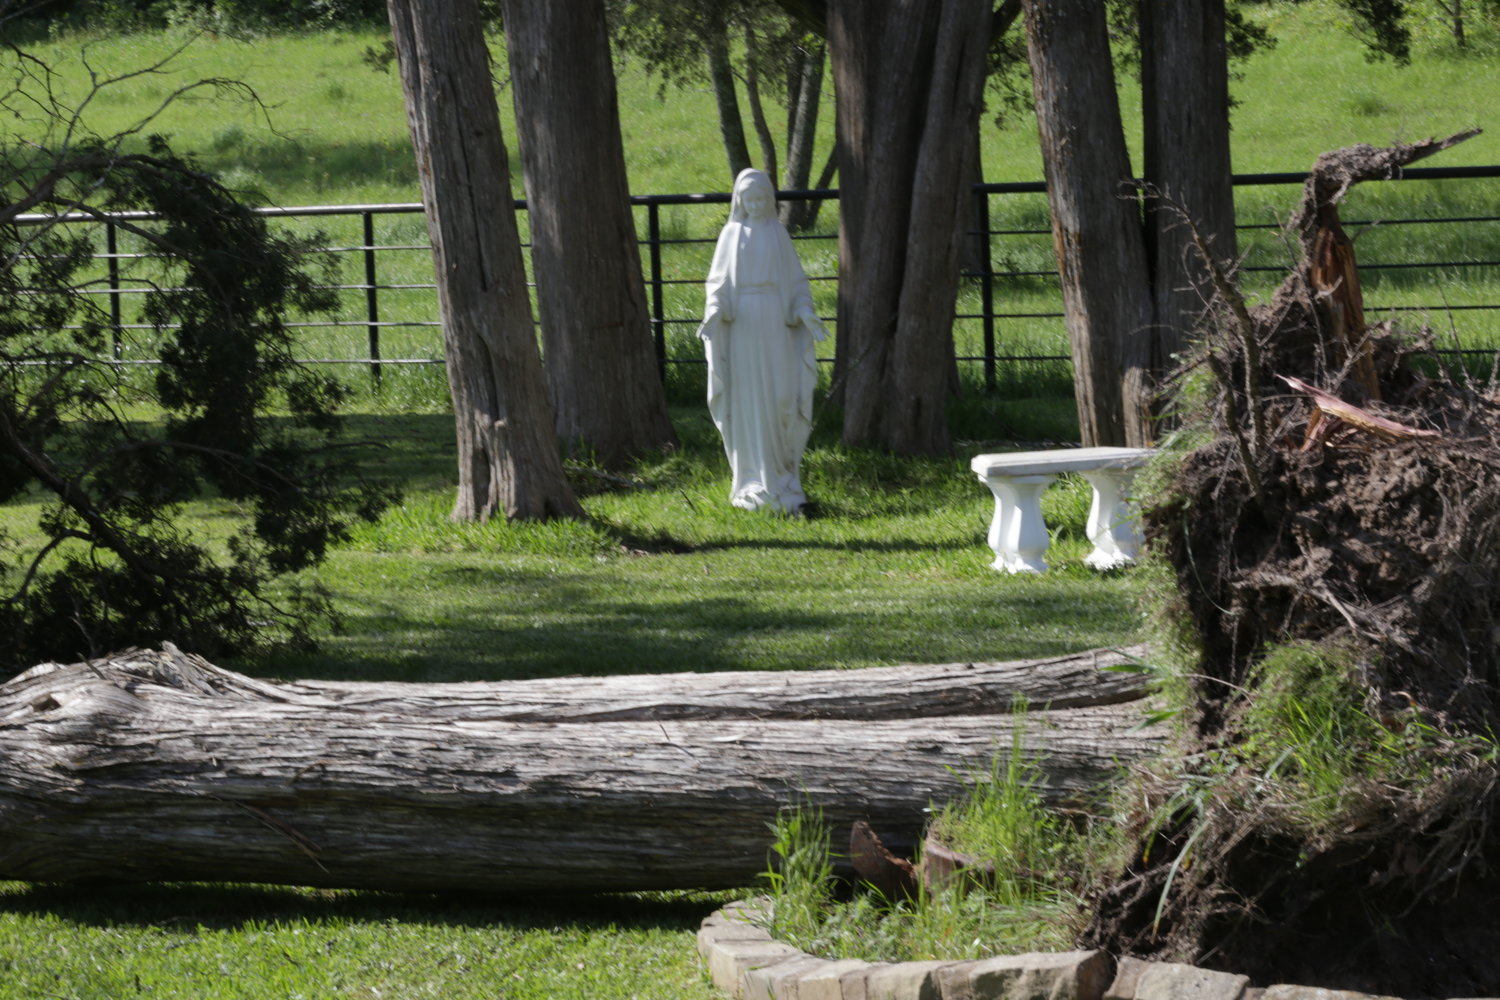 In west Mineola a cedar tree was felled by the winds, but the Virgin Mary maintained her Easter vigil.